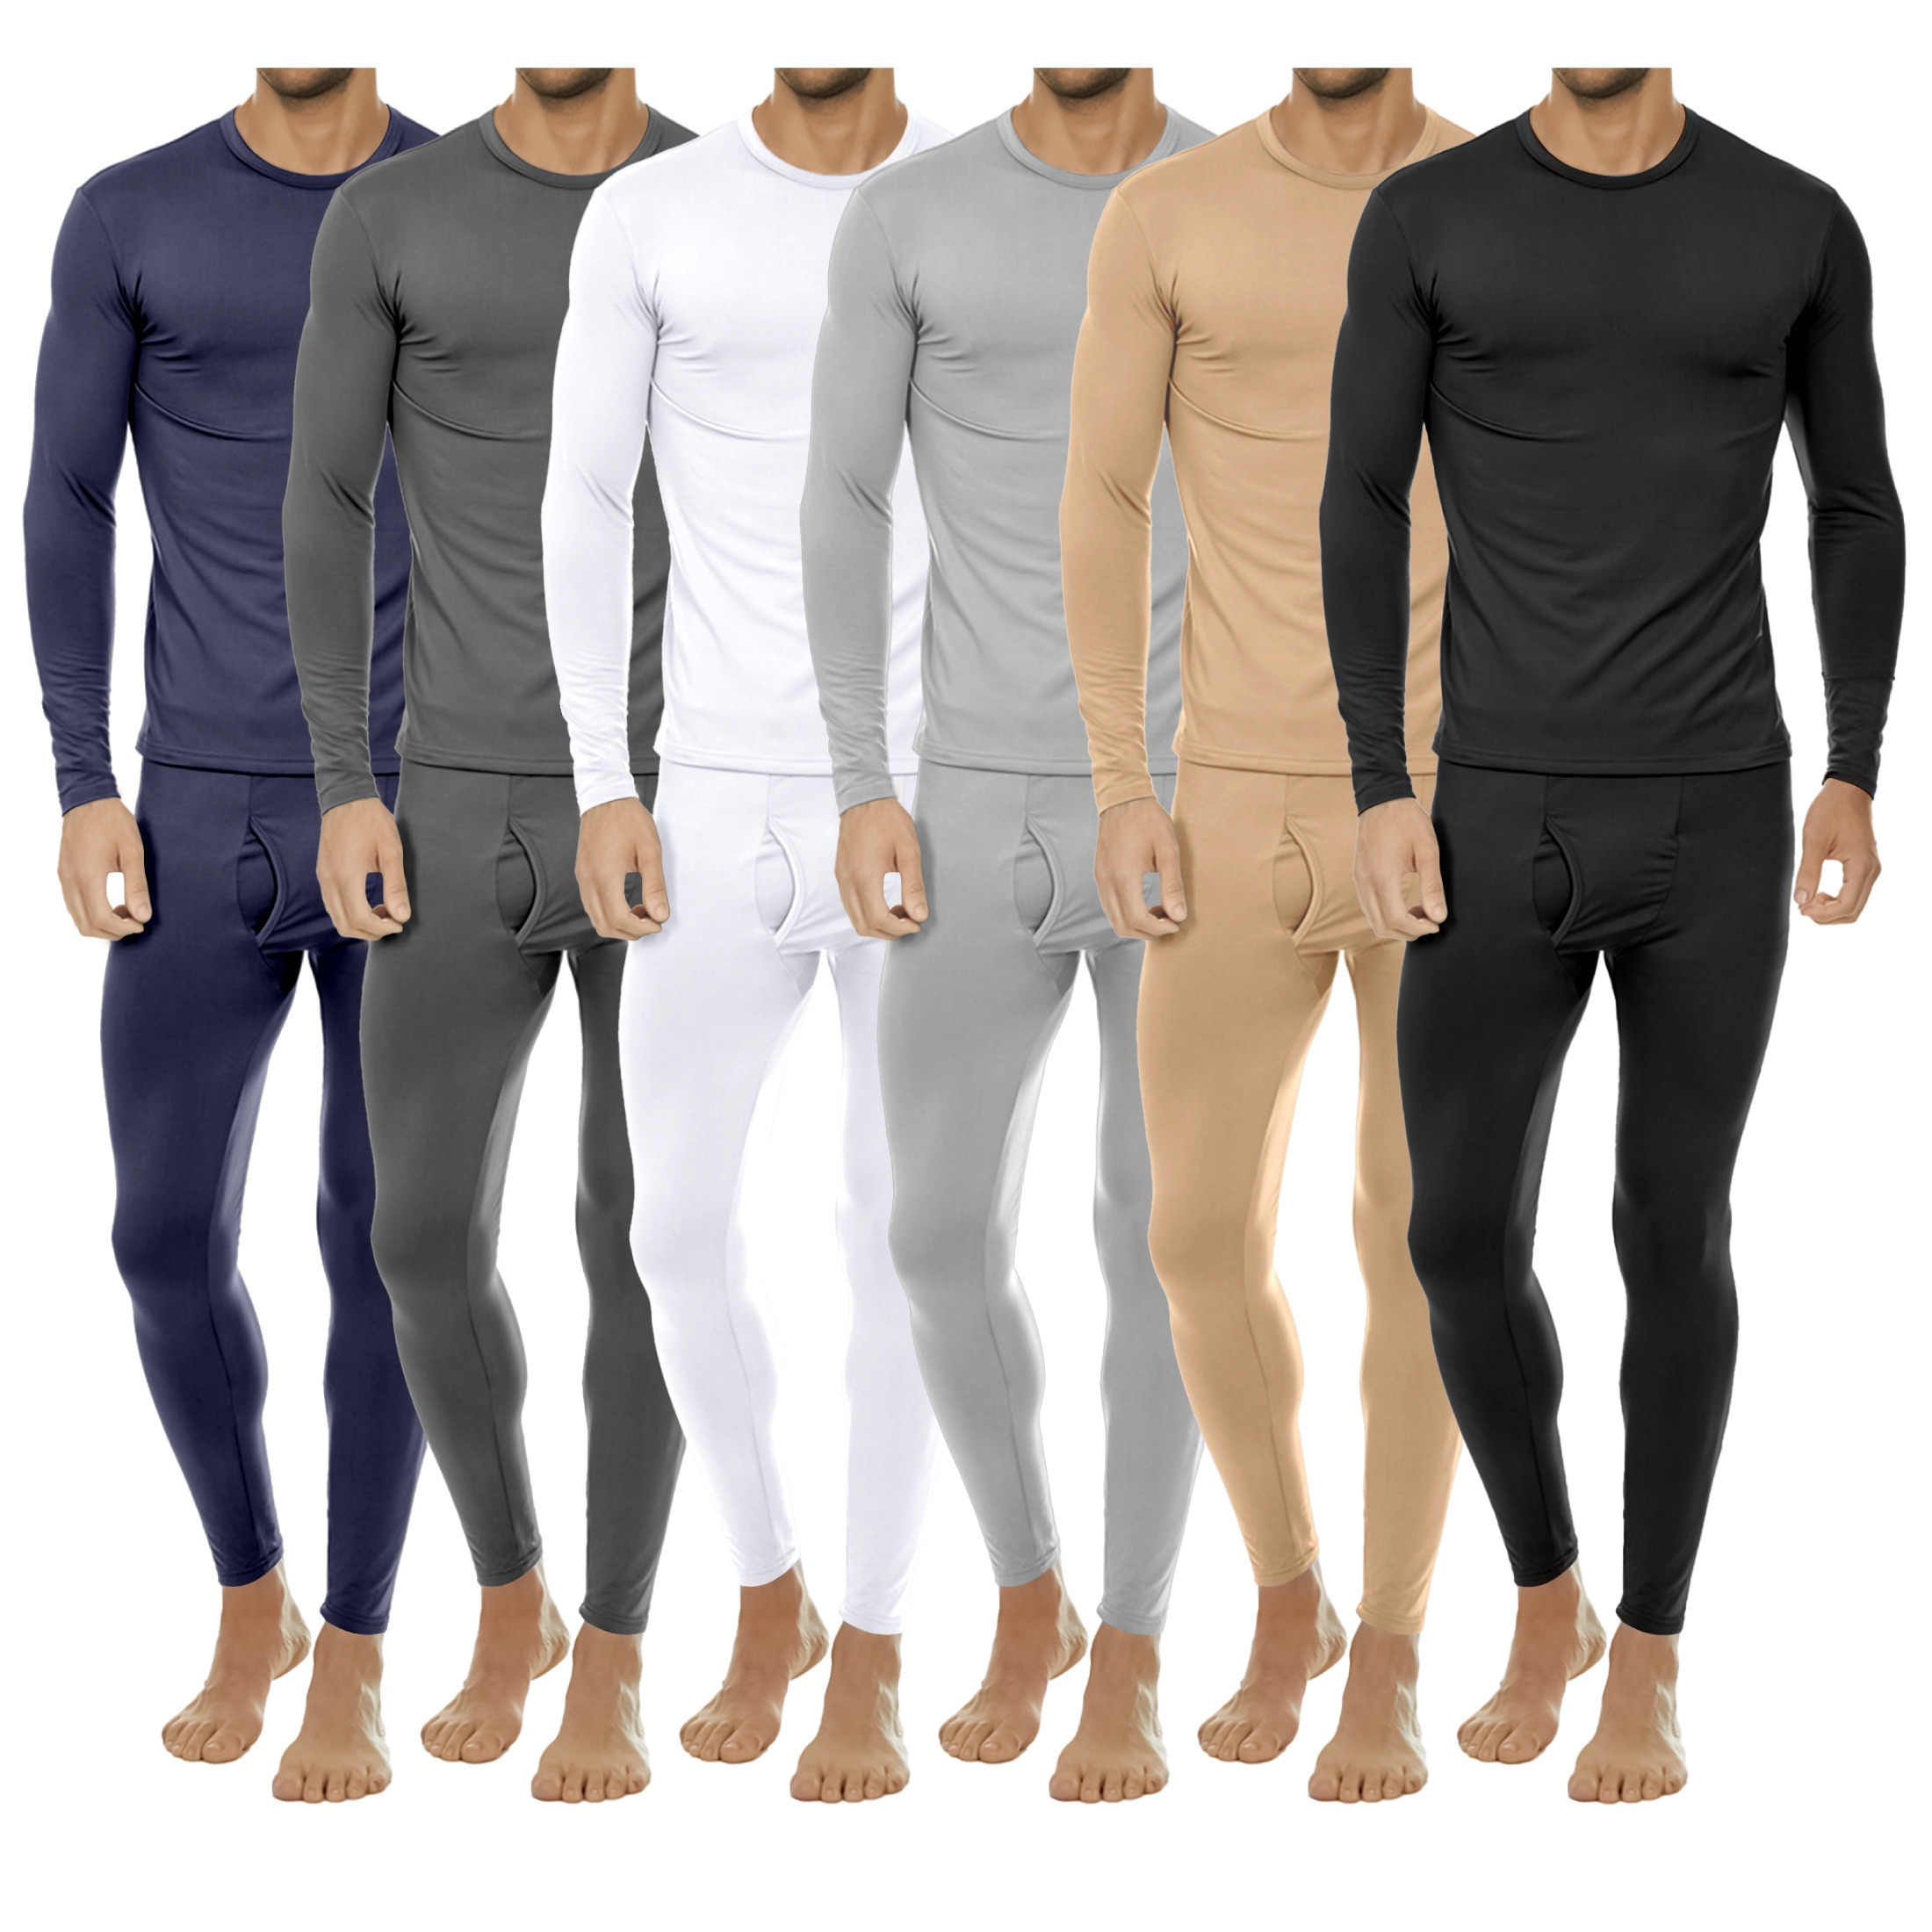 Men's Fleece Lined Thermal Underwear Set For Cold Weather - S